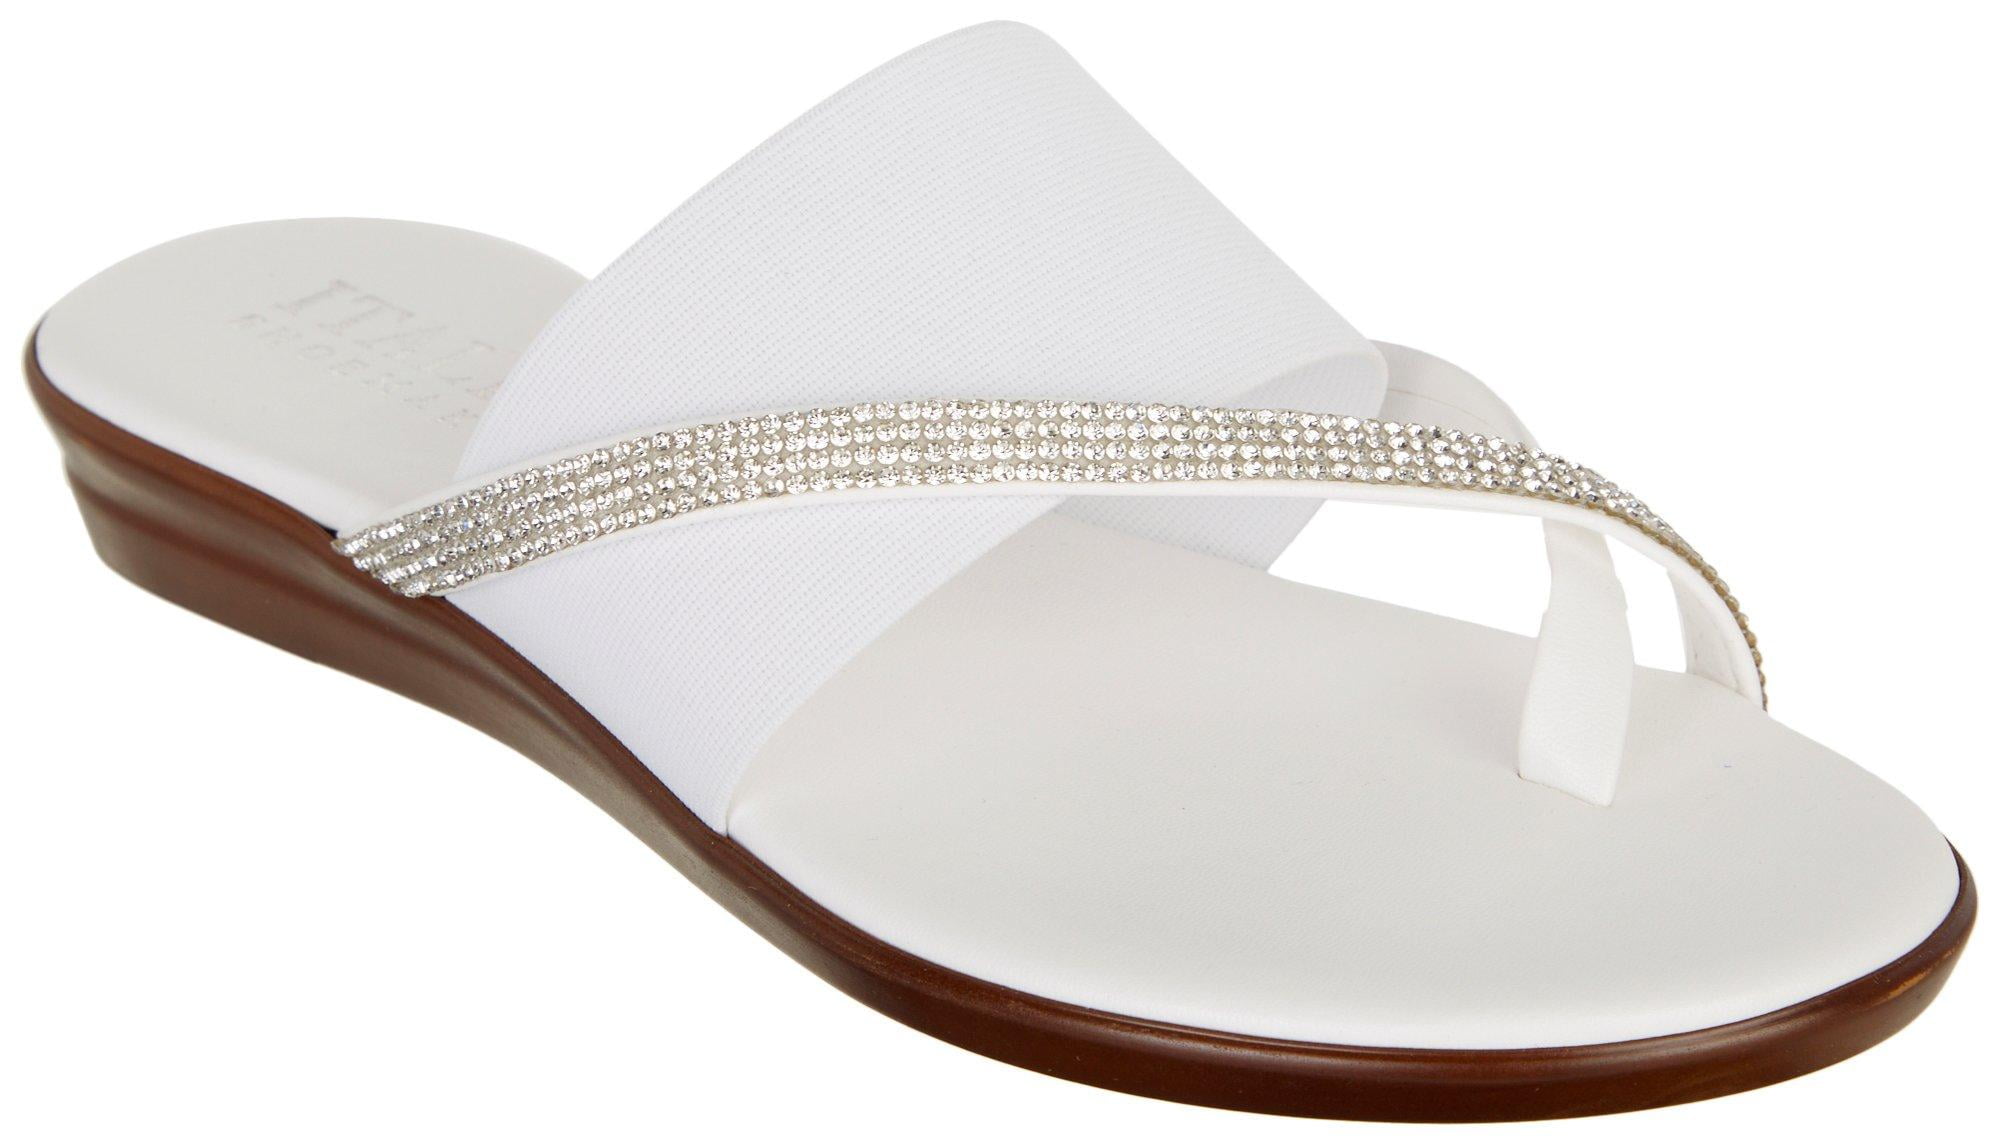 Italian Shoemakers Caty Slip On Dressy Thong Low Wedge Sandals Choose Sz/Color 